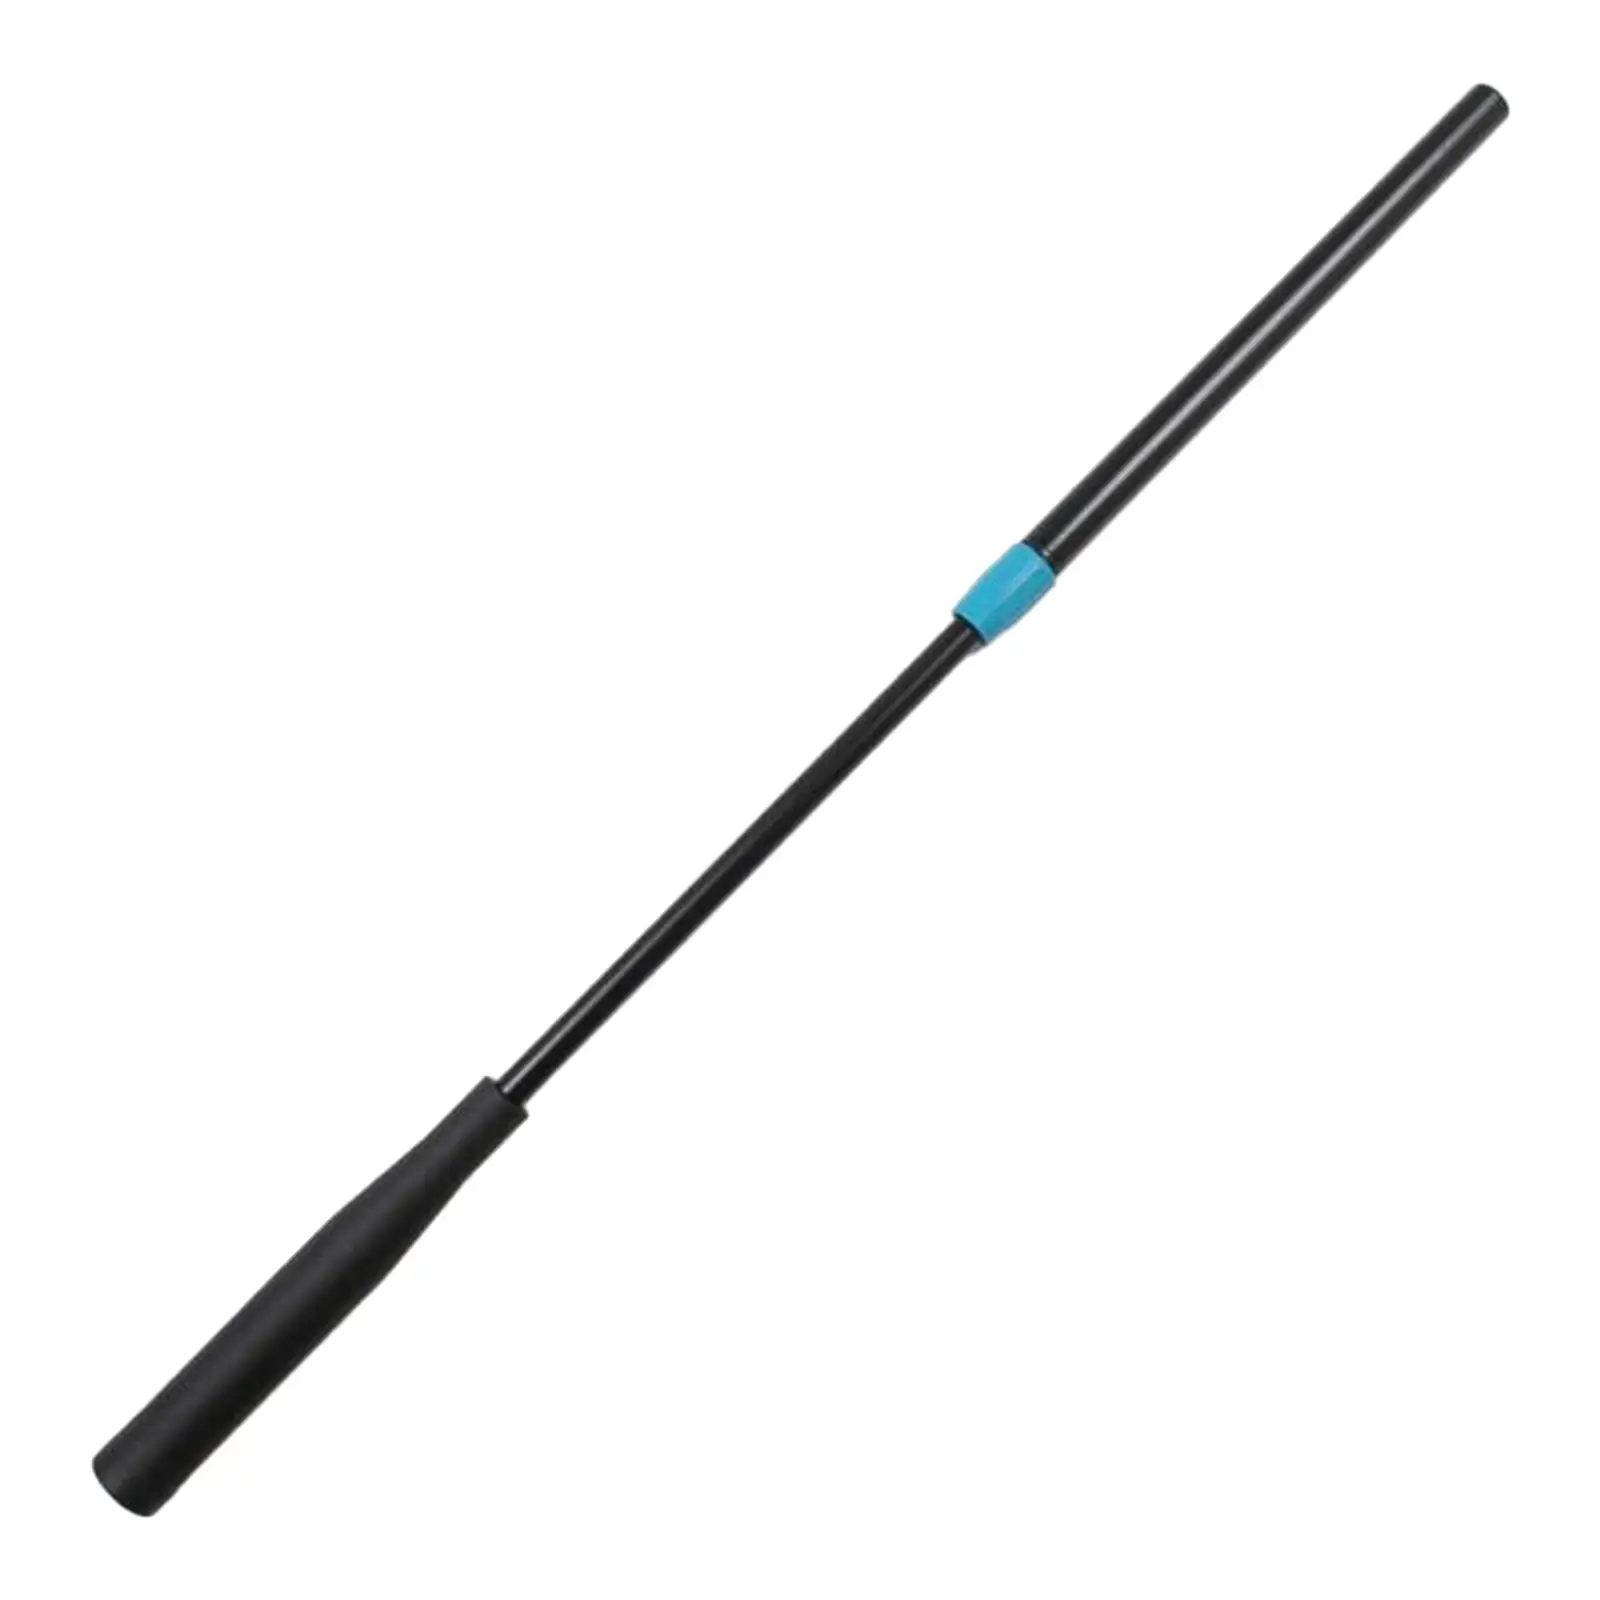 Snooker Pool Cue Extension, Professional High Strength Tool, Telescopic Billiard